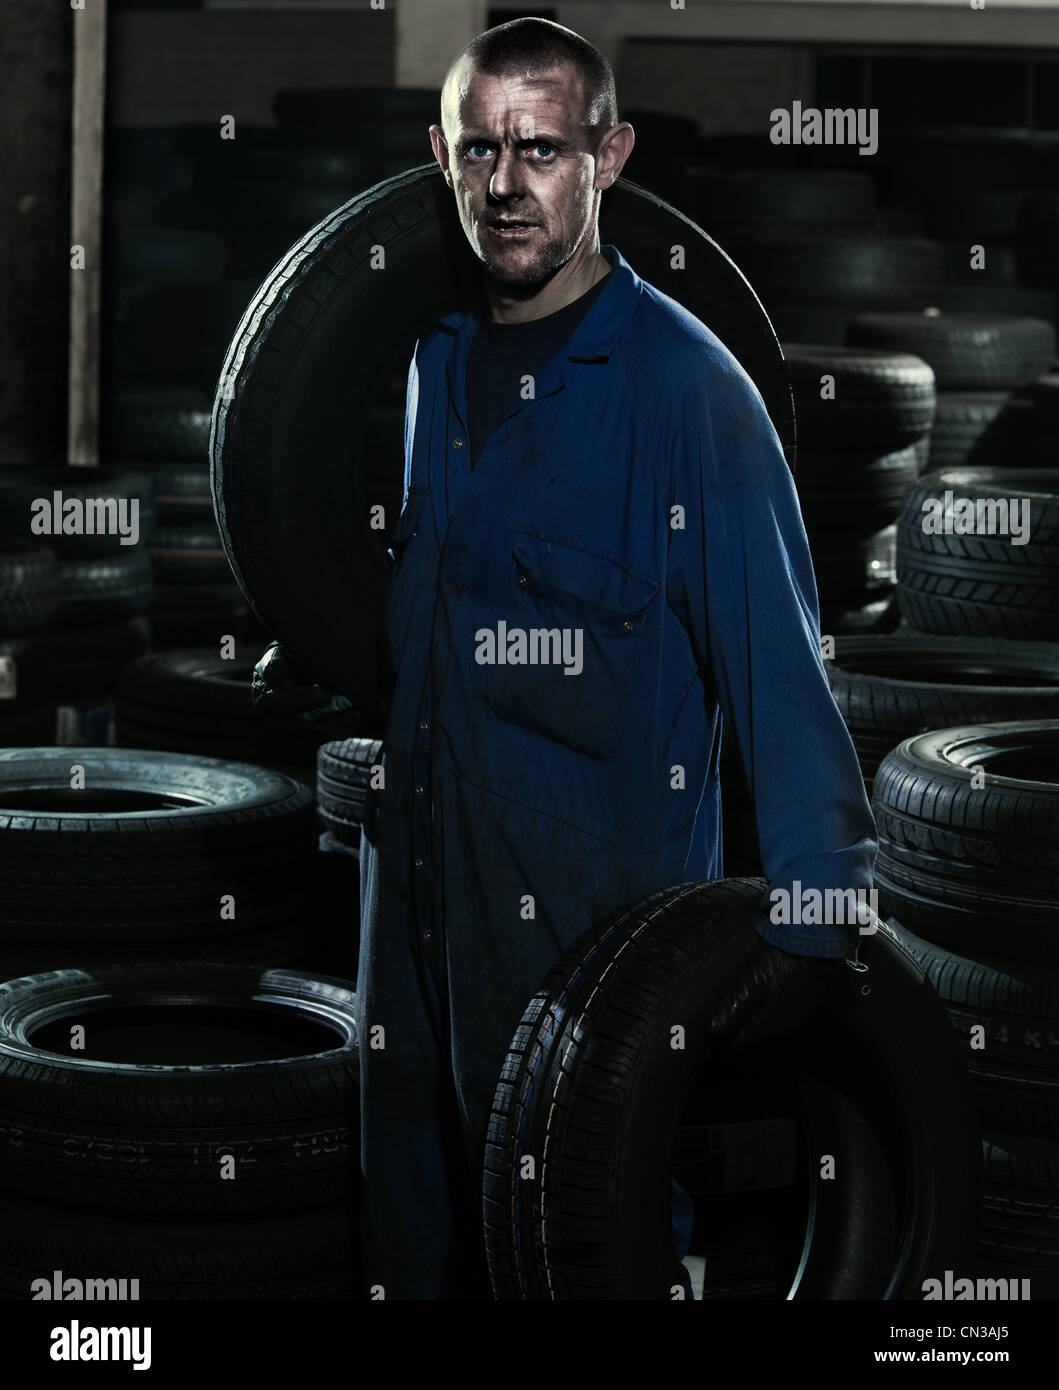 Car mechanic in workshop with car tires Stock Photo